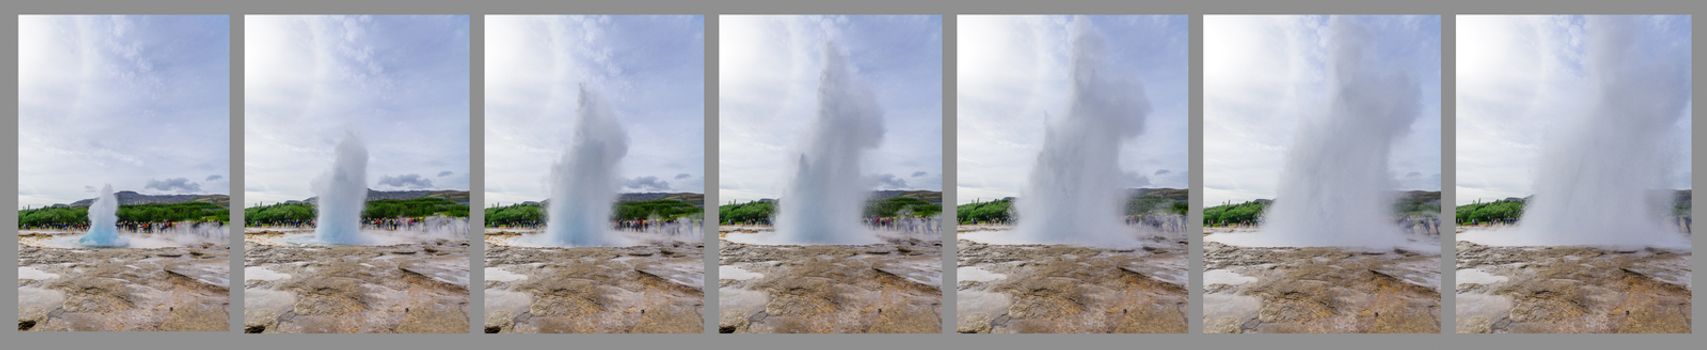 GEYSIR, ICELAND - JUNE 11, 2016: Collage of the stages in an eruption of the Strokkur geyser, with tourists watching, in Geysir, Iceland